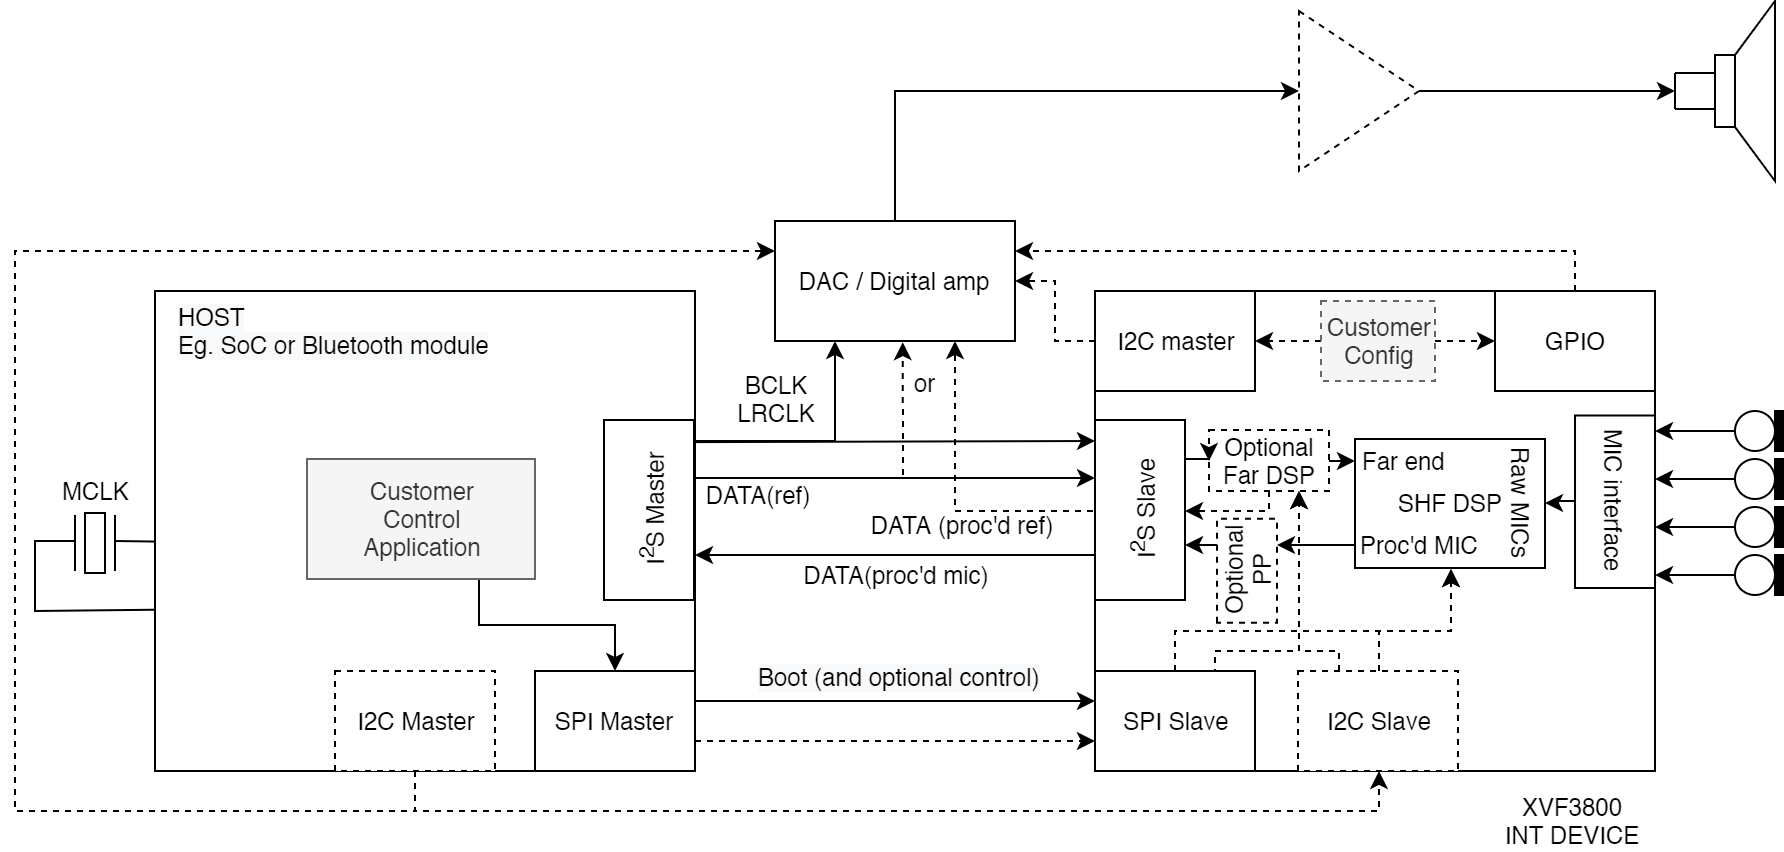 ../../../../_images/XVF3800_system_diagram_INT_device.png